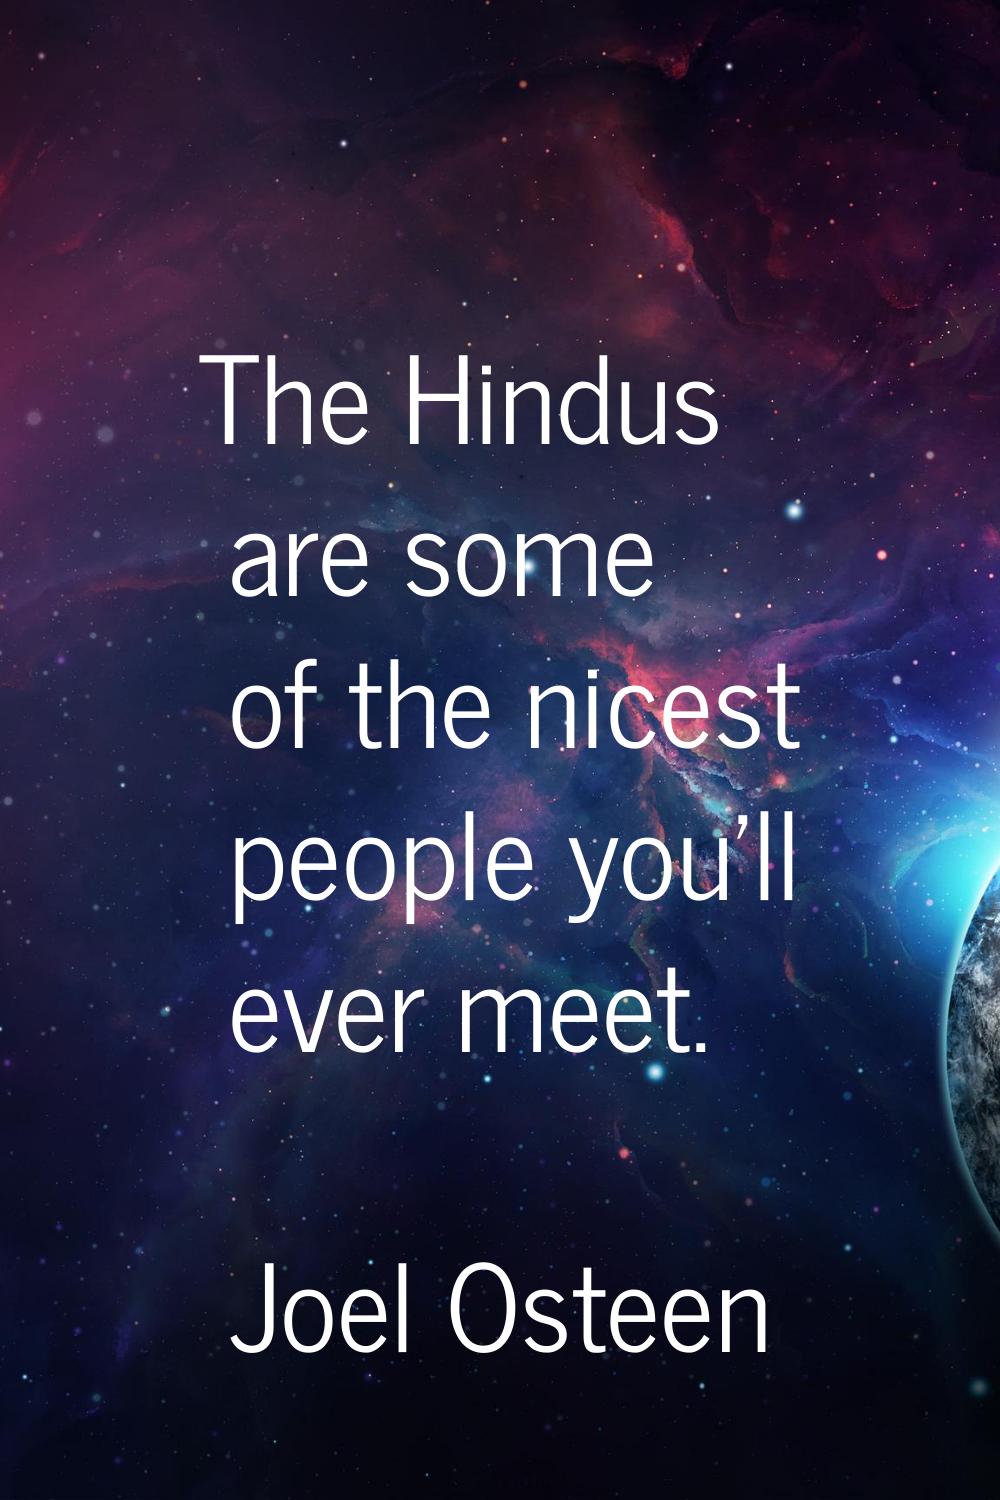 The Hindus are some of the nicest people you'll ever meet.